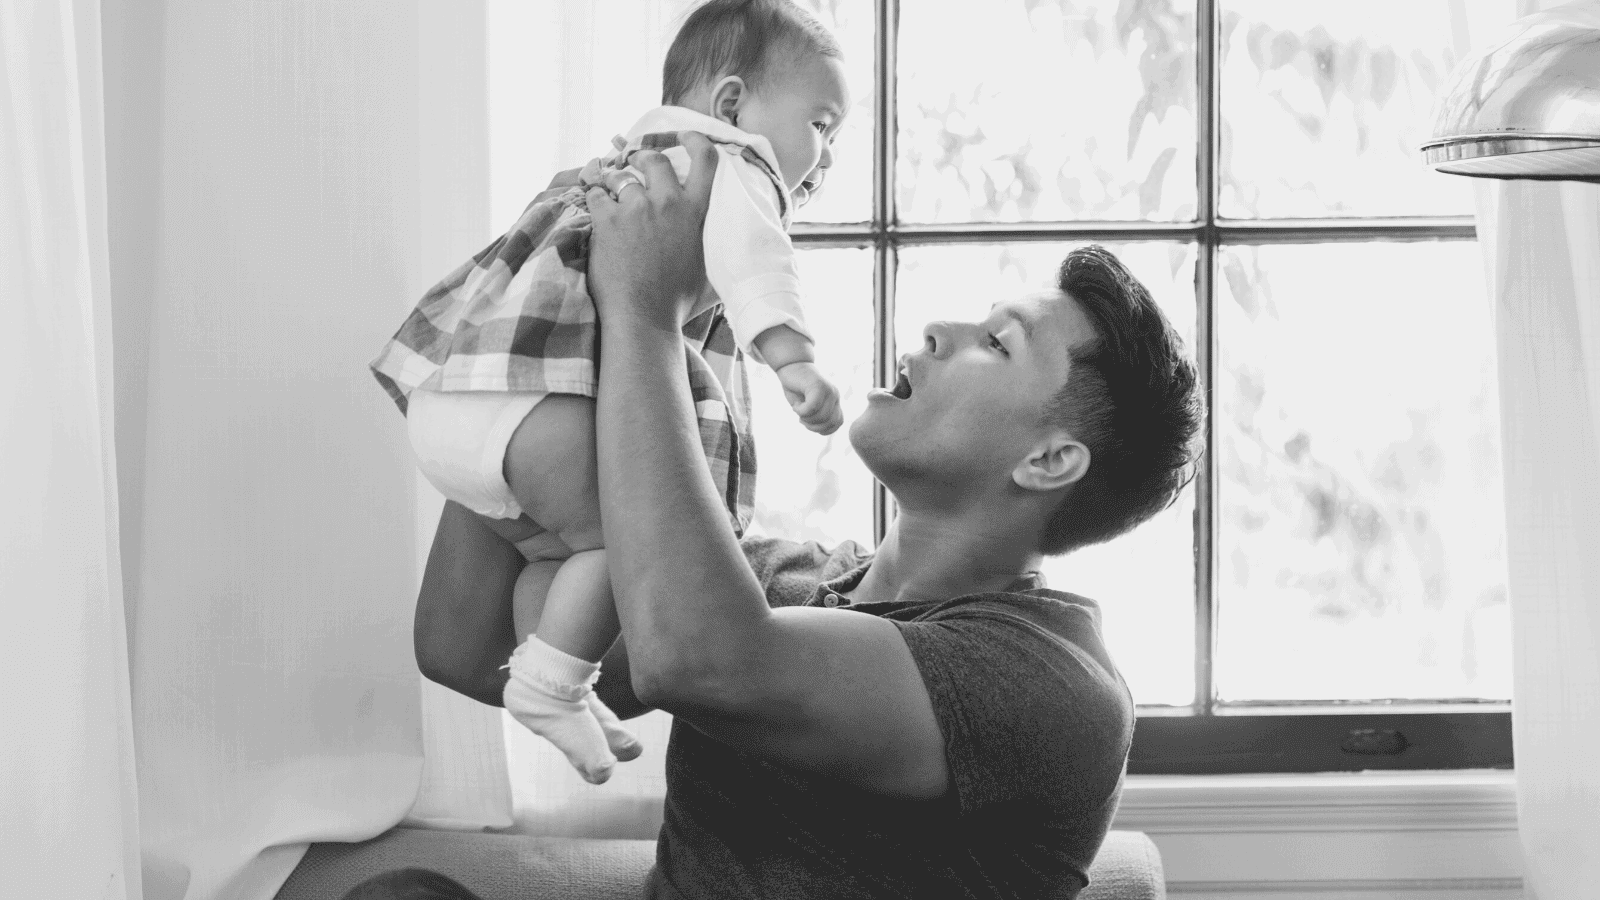 15 Photos That Perfectly Capture The Love Between Babies and Their Dads